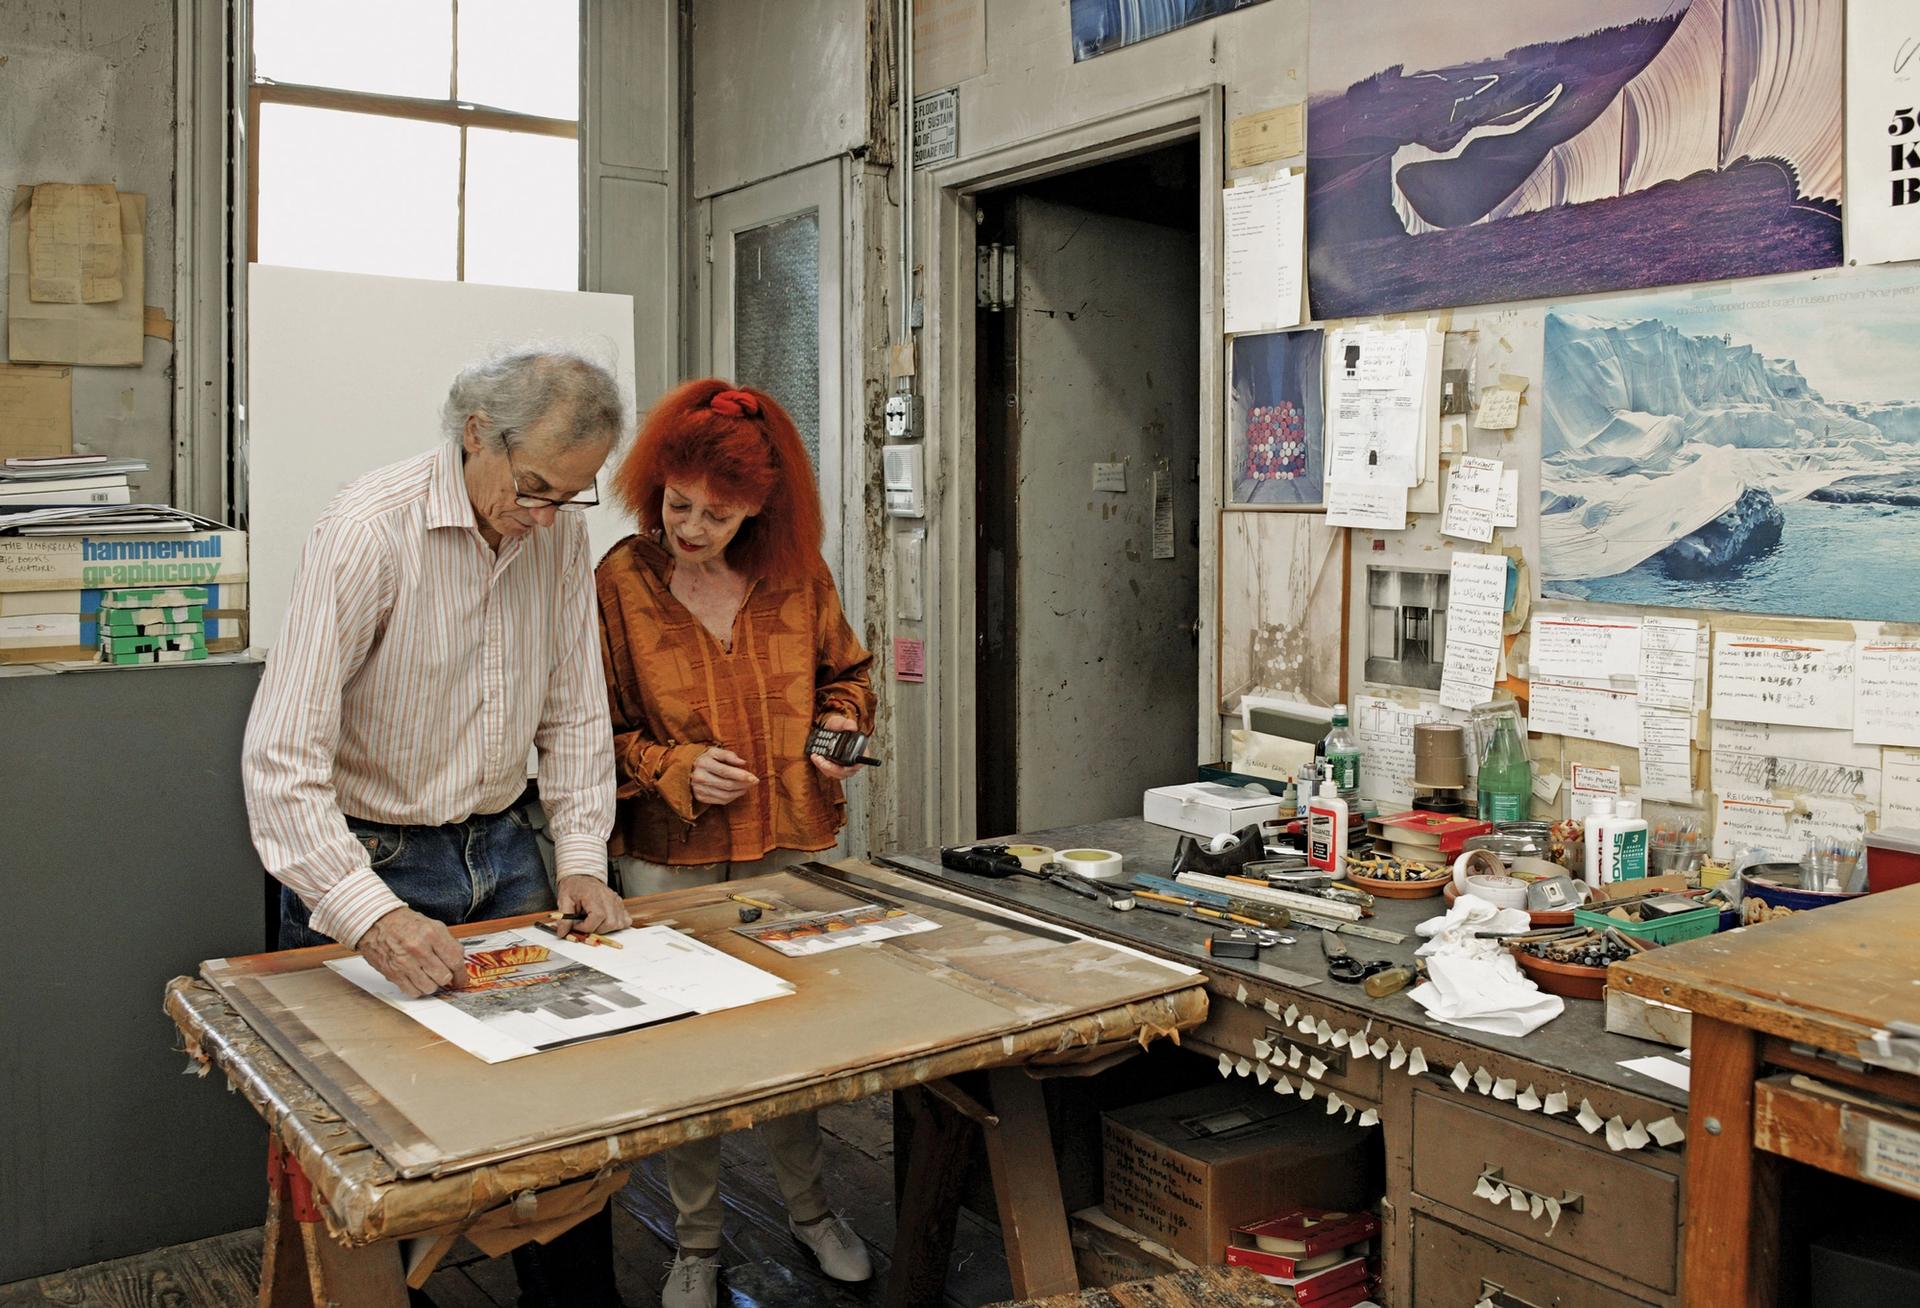 Christo and Jeanne Claude in their New York studio and home, surrounded by their art collection Photo: Wolfgang Volz © The Estate of Christo V. Javacheff